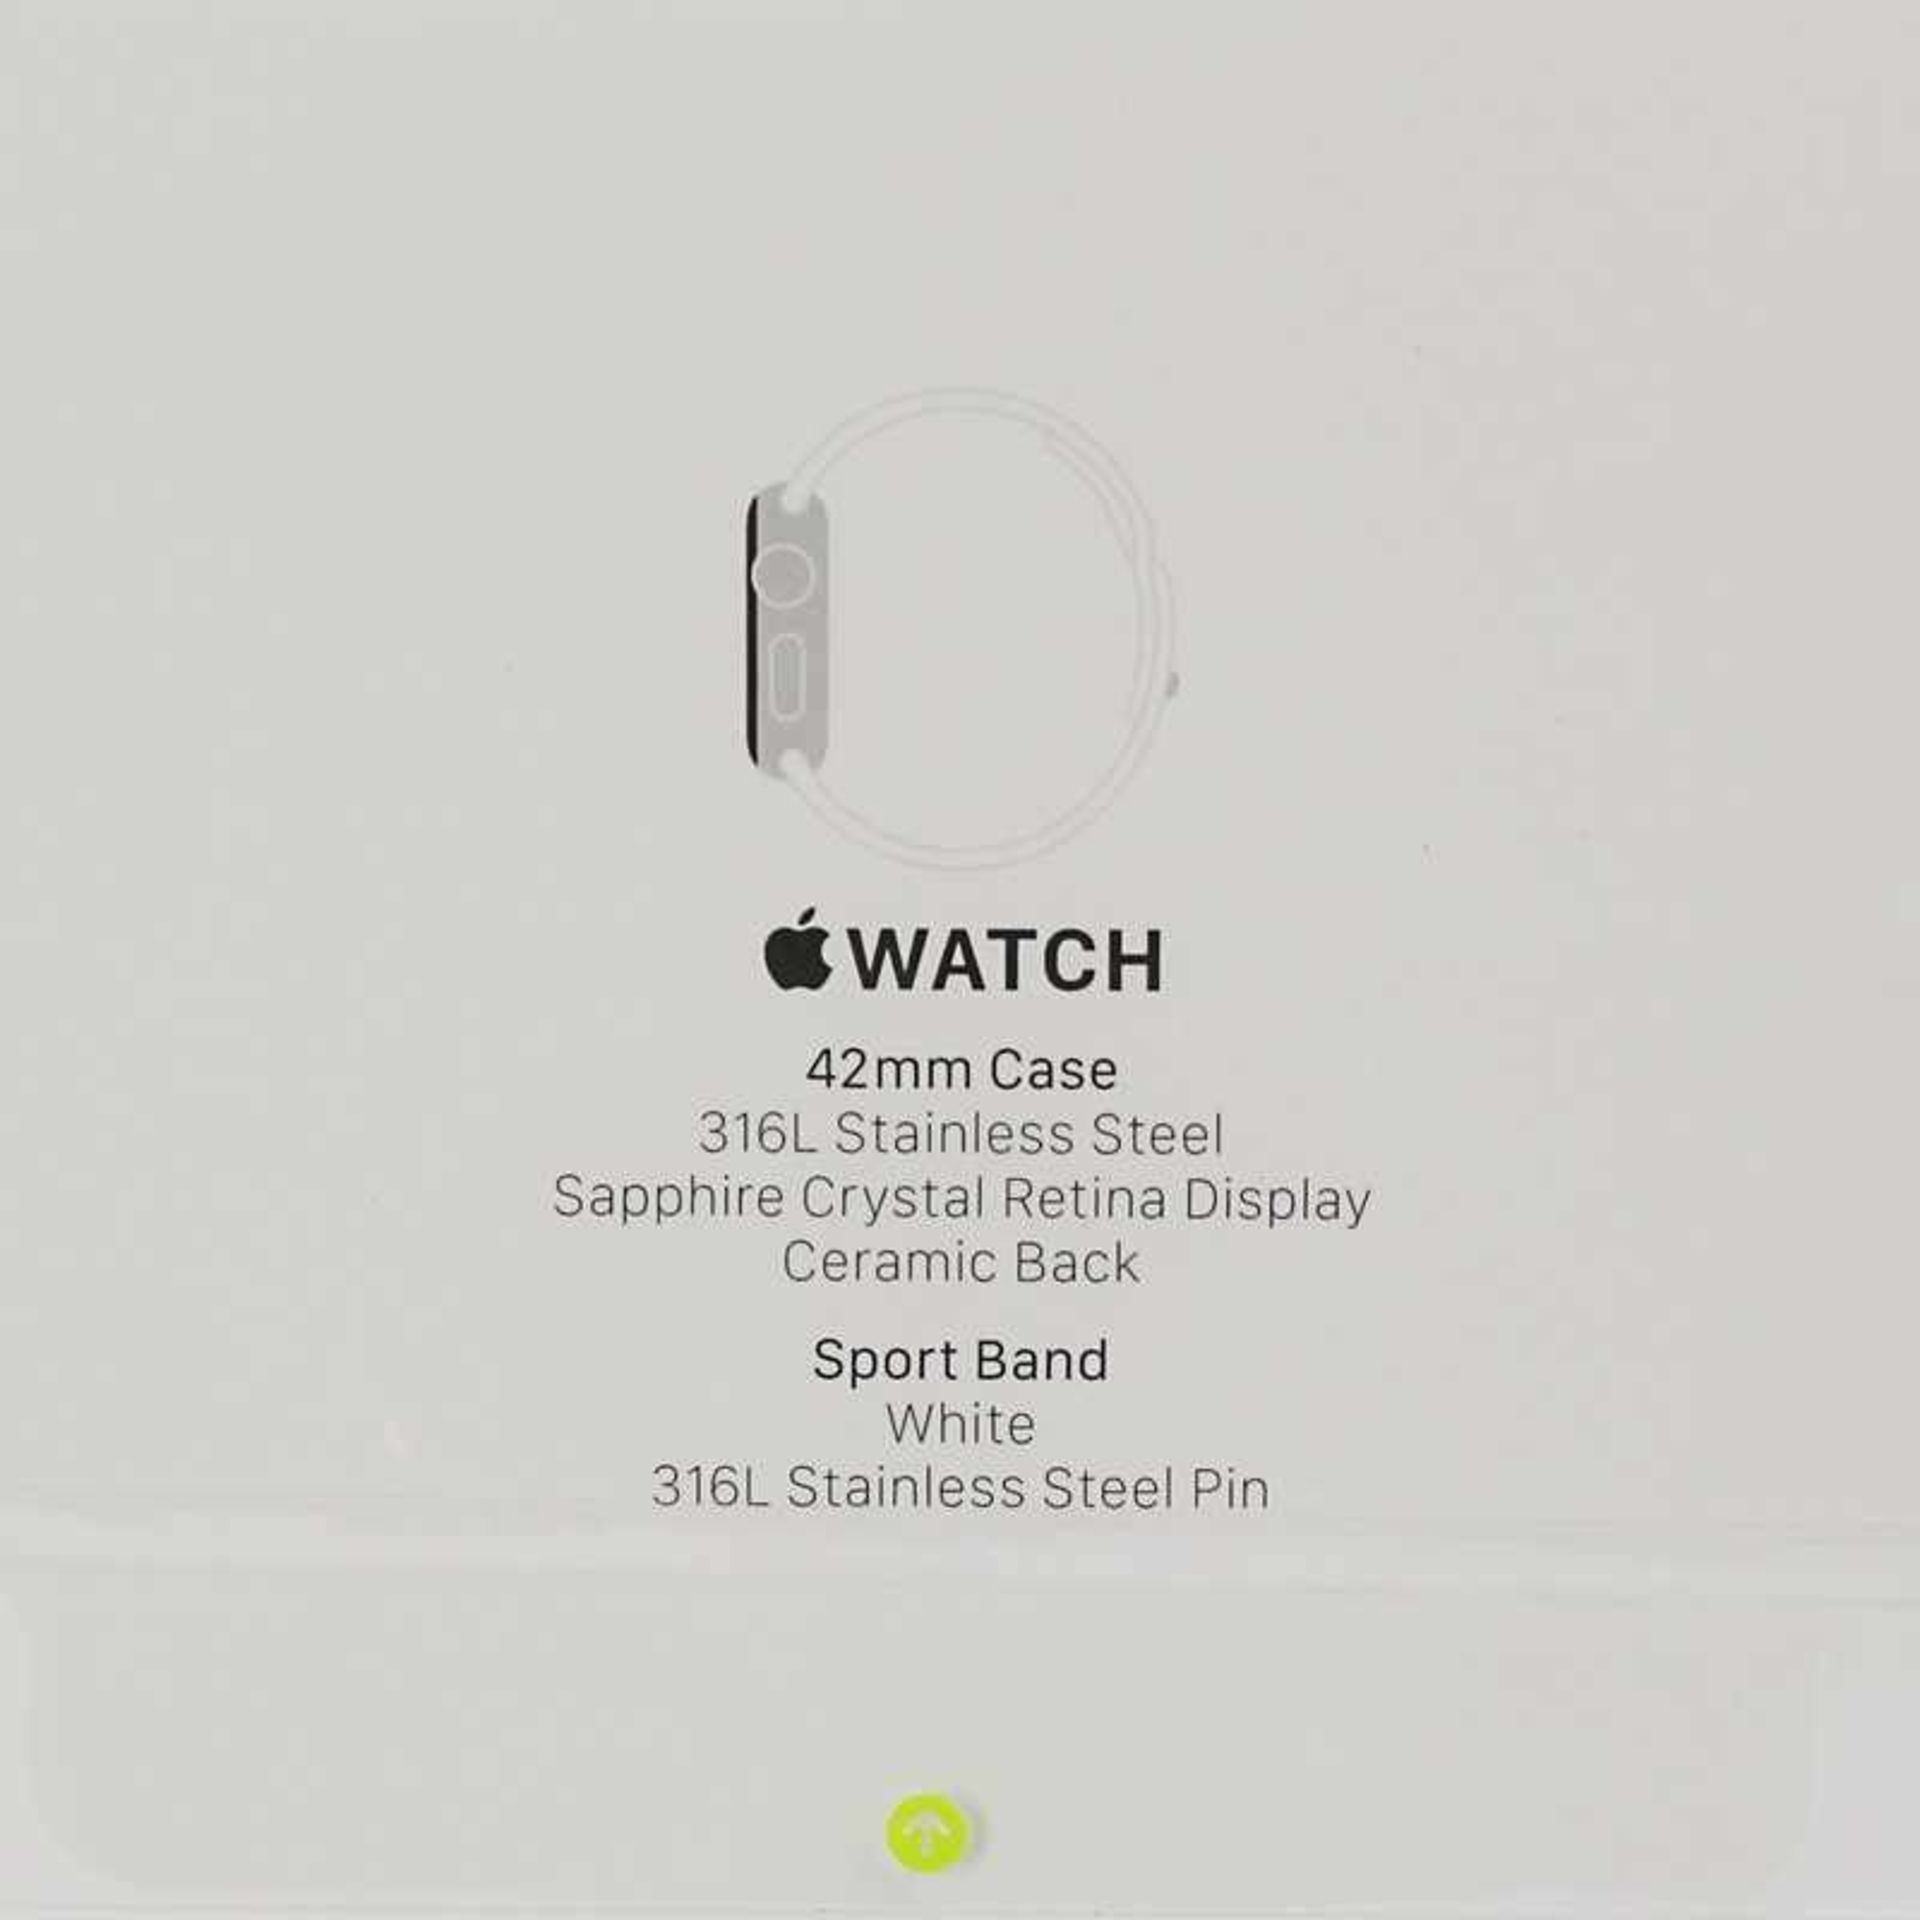 Unisexarmbanduhr - Apple Watch Designed by Apple in California, "MJ3V2B/A Apple Watch 42mm, SS White - Image 2 of 3